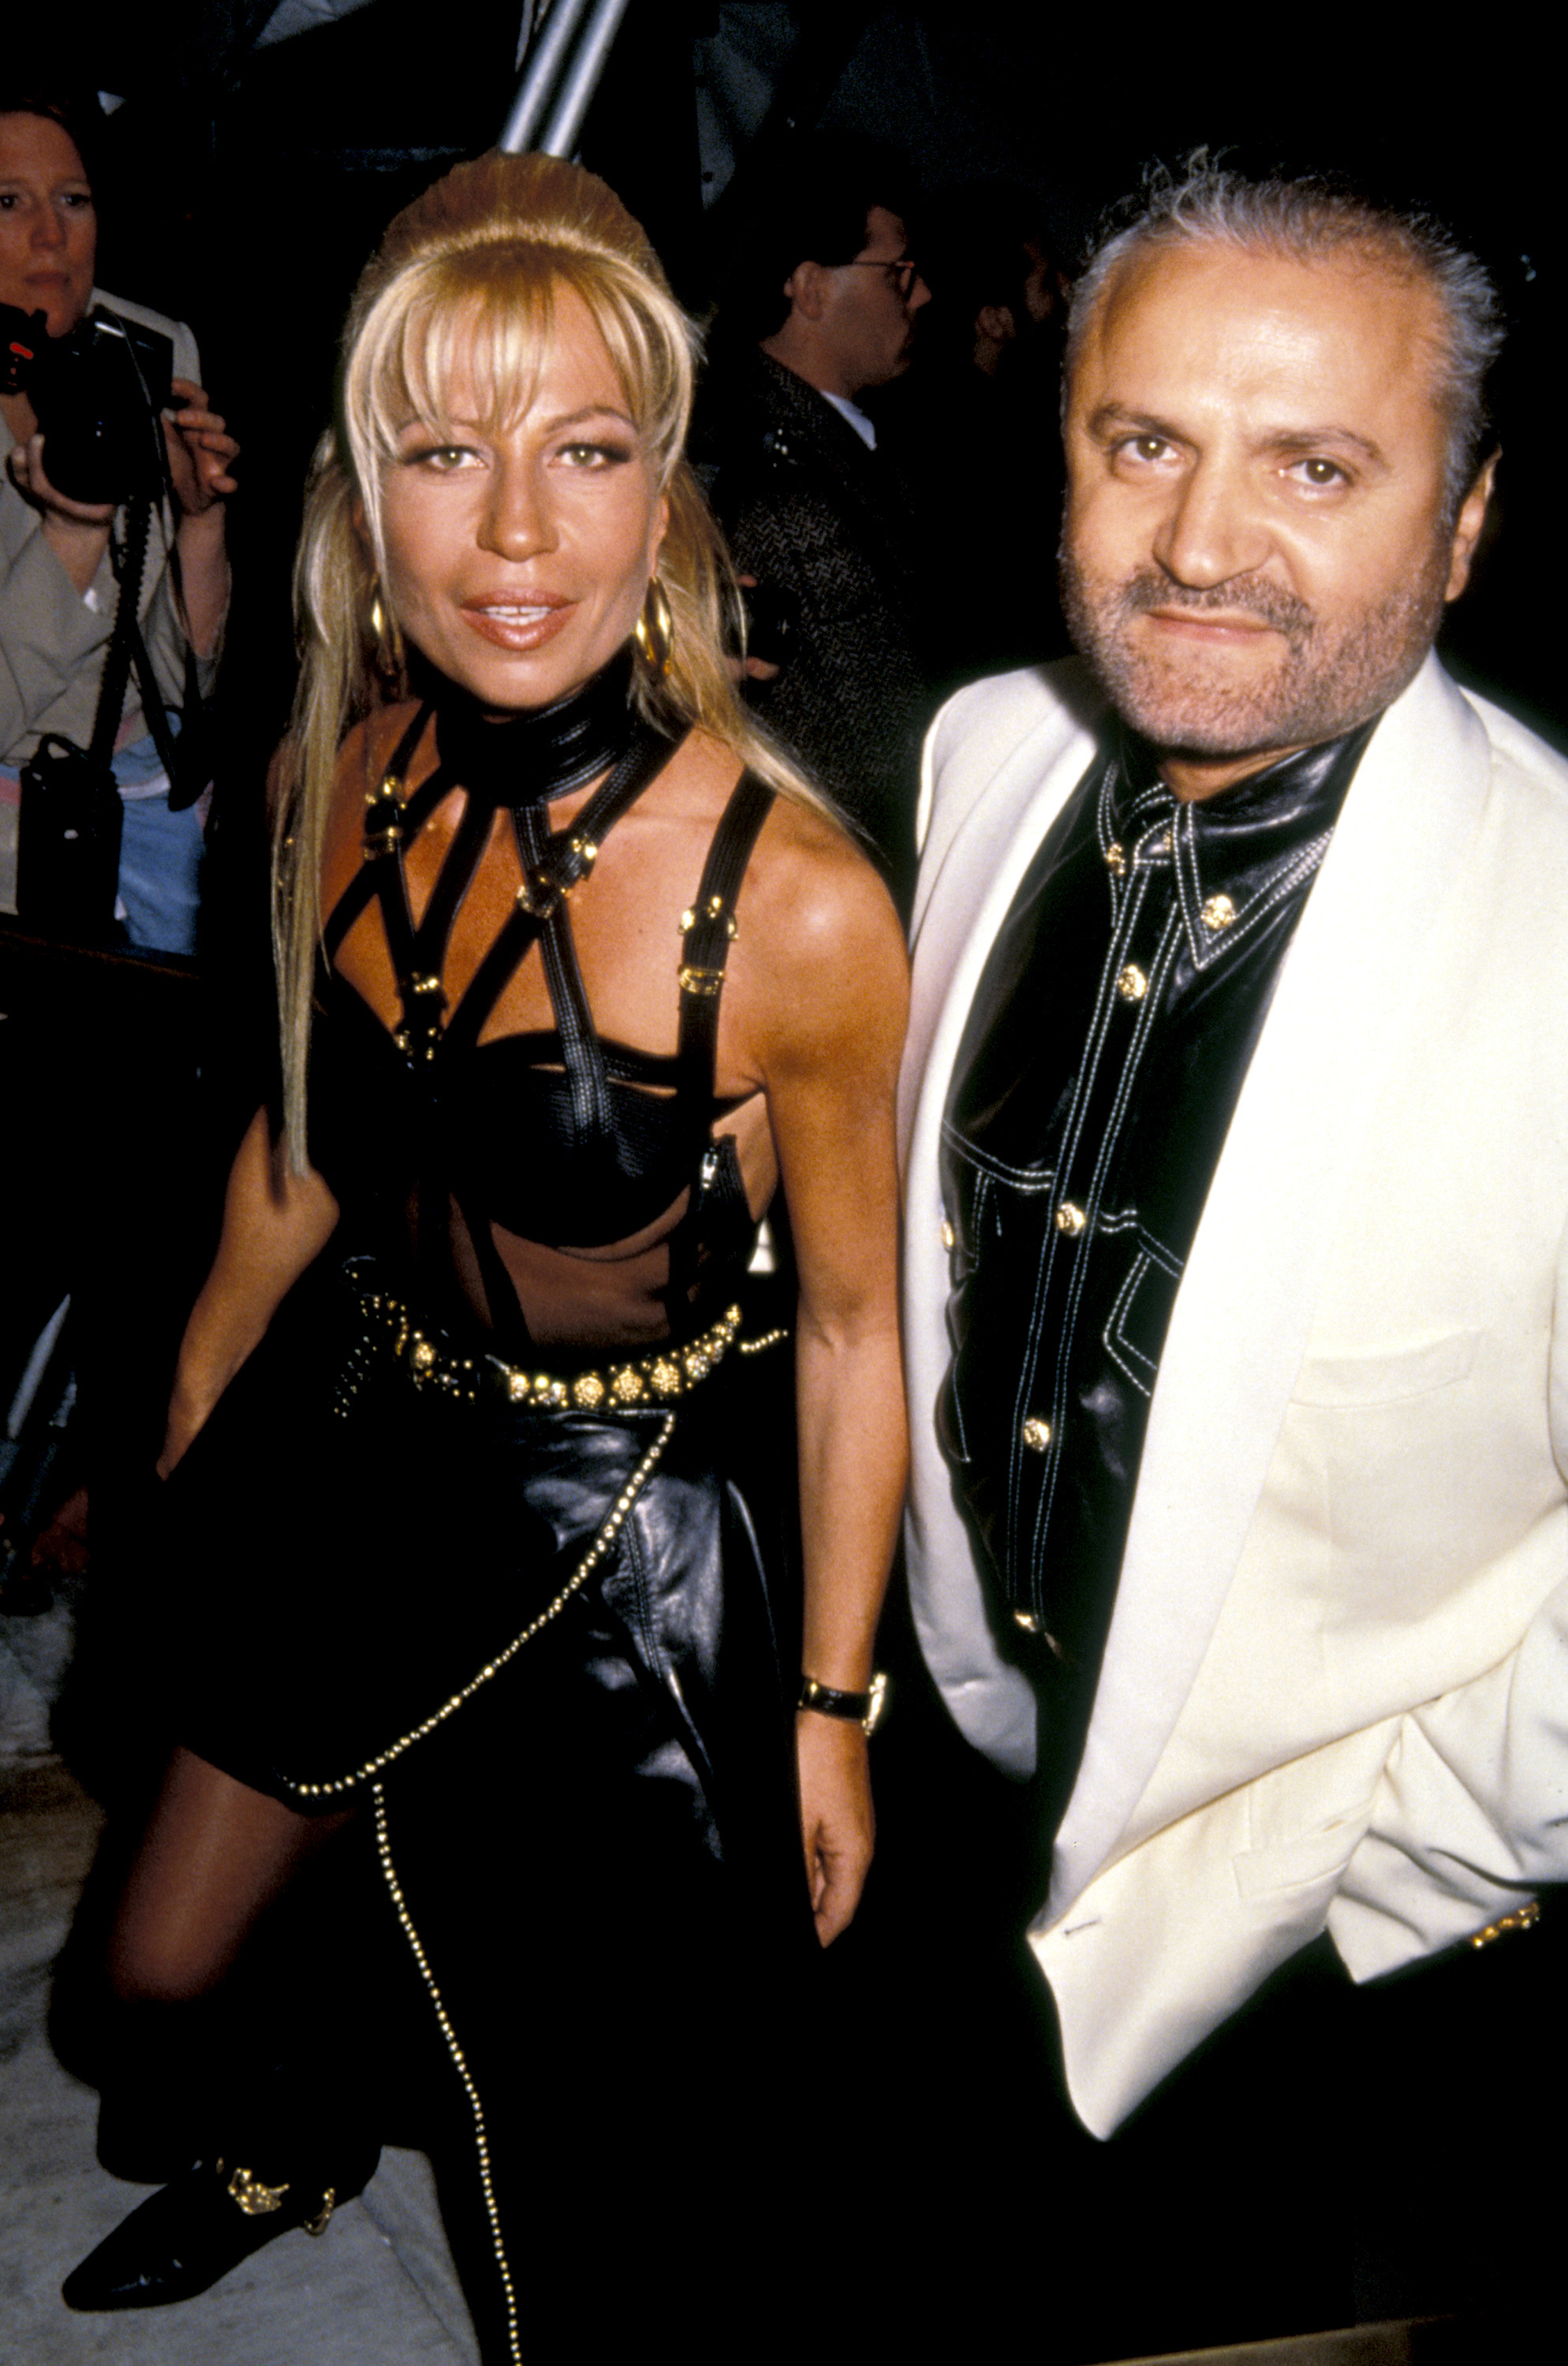 Donatella and Gianni Versace at Vogue Magazine's 100th Anniversary celebration on April 02, 1993 | Source: Getty Images